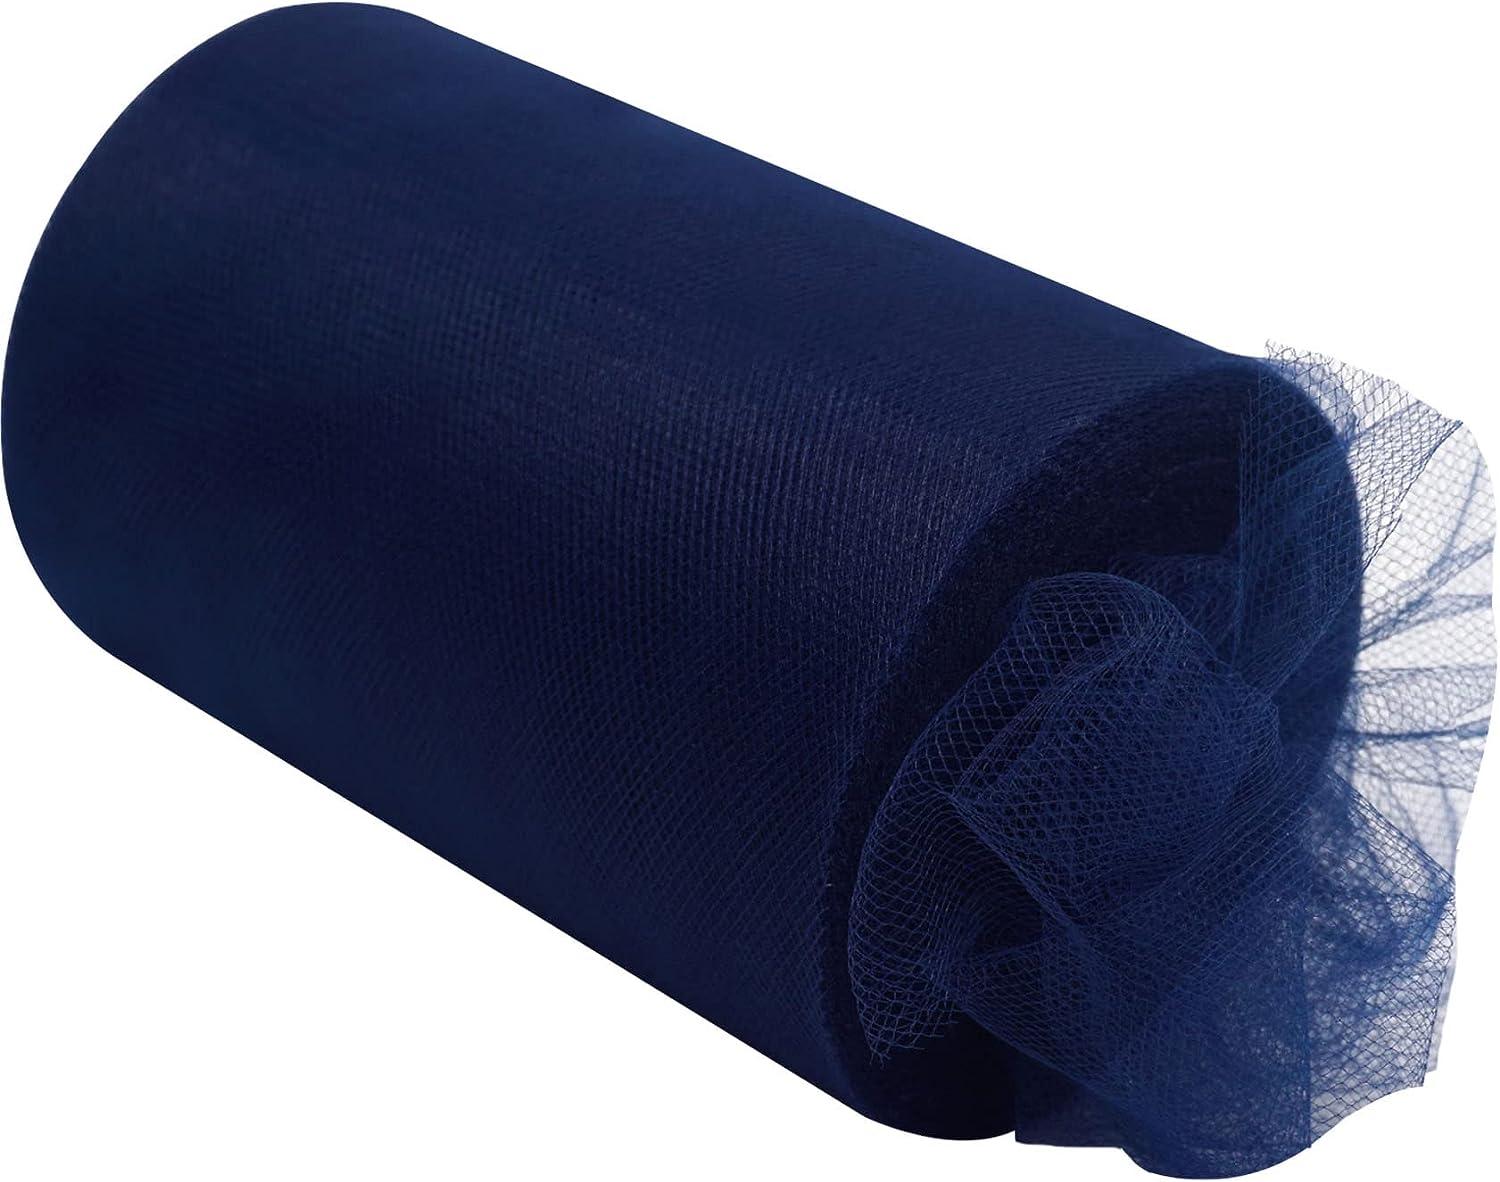 Royal blue tulle fabric roll 6-inch 74.64-foot tulle ribbon mesh